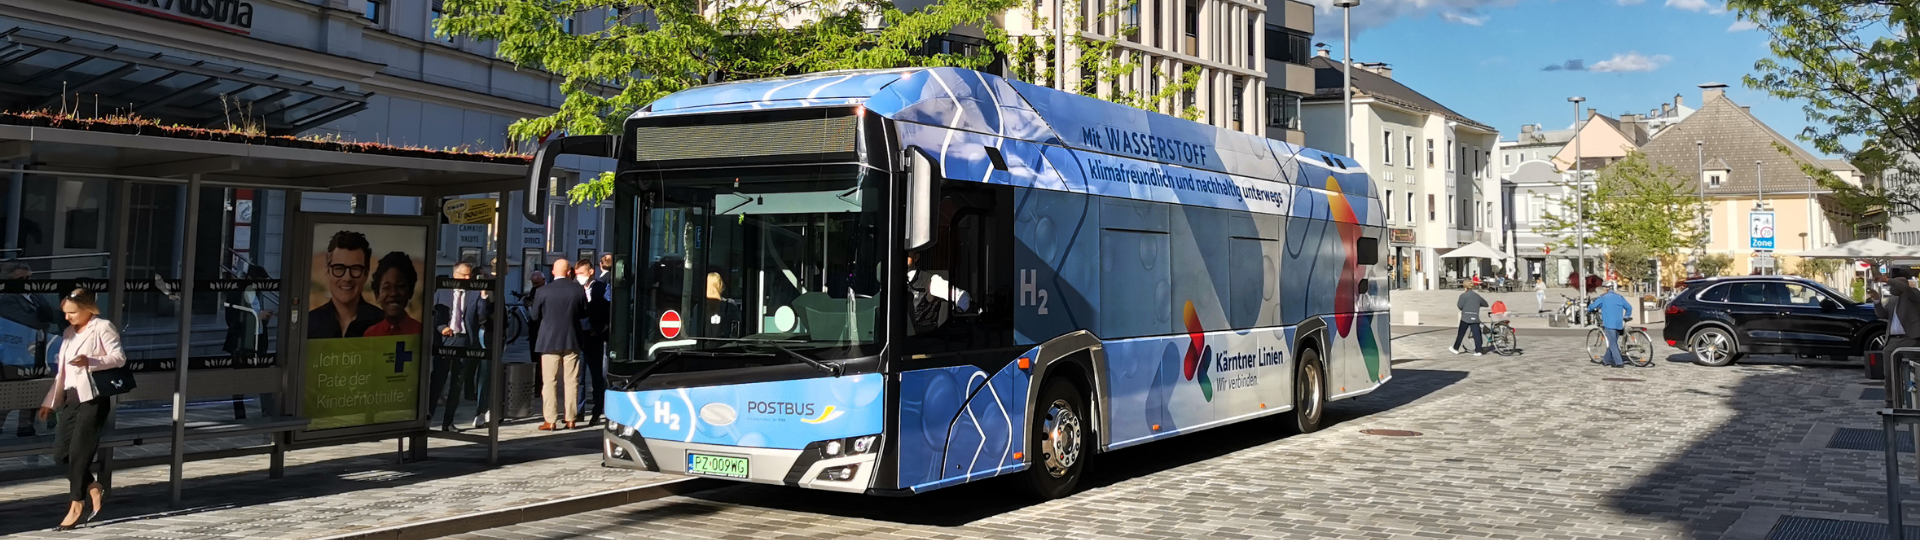 Austria’s biggest carrier orders first hydrogen buses